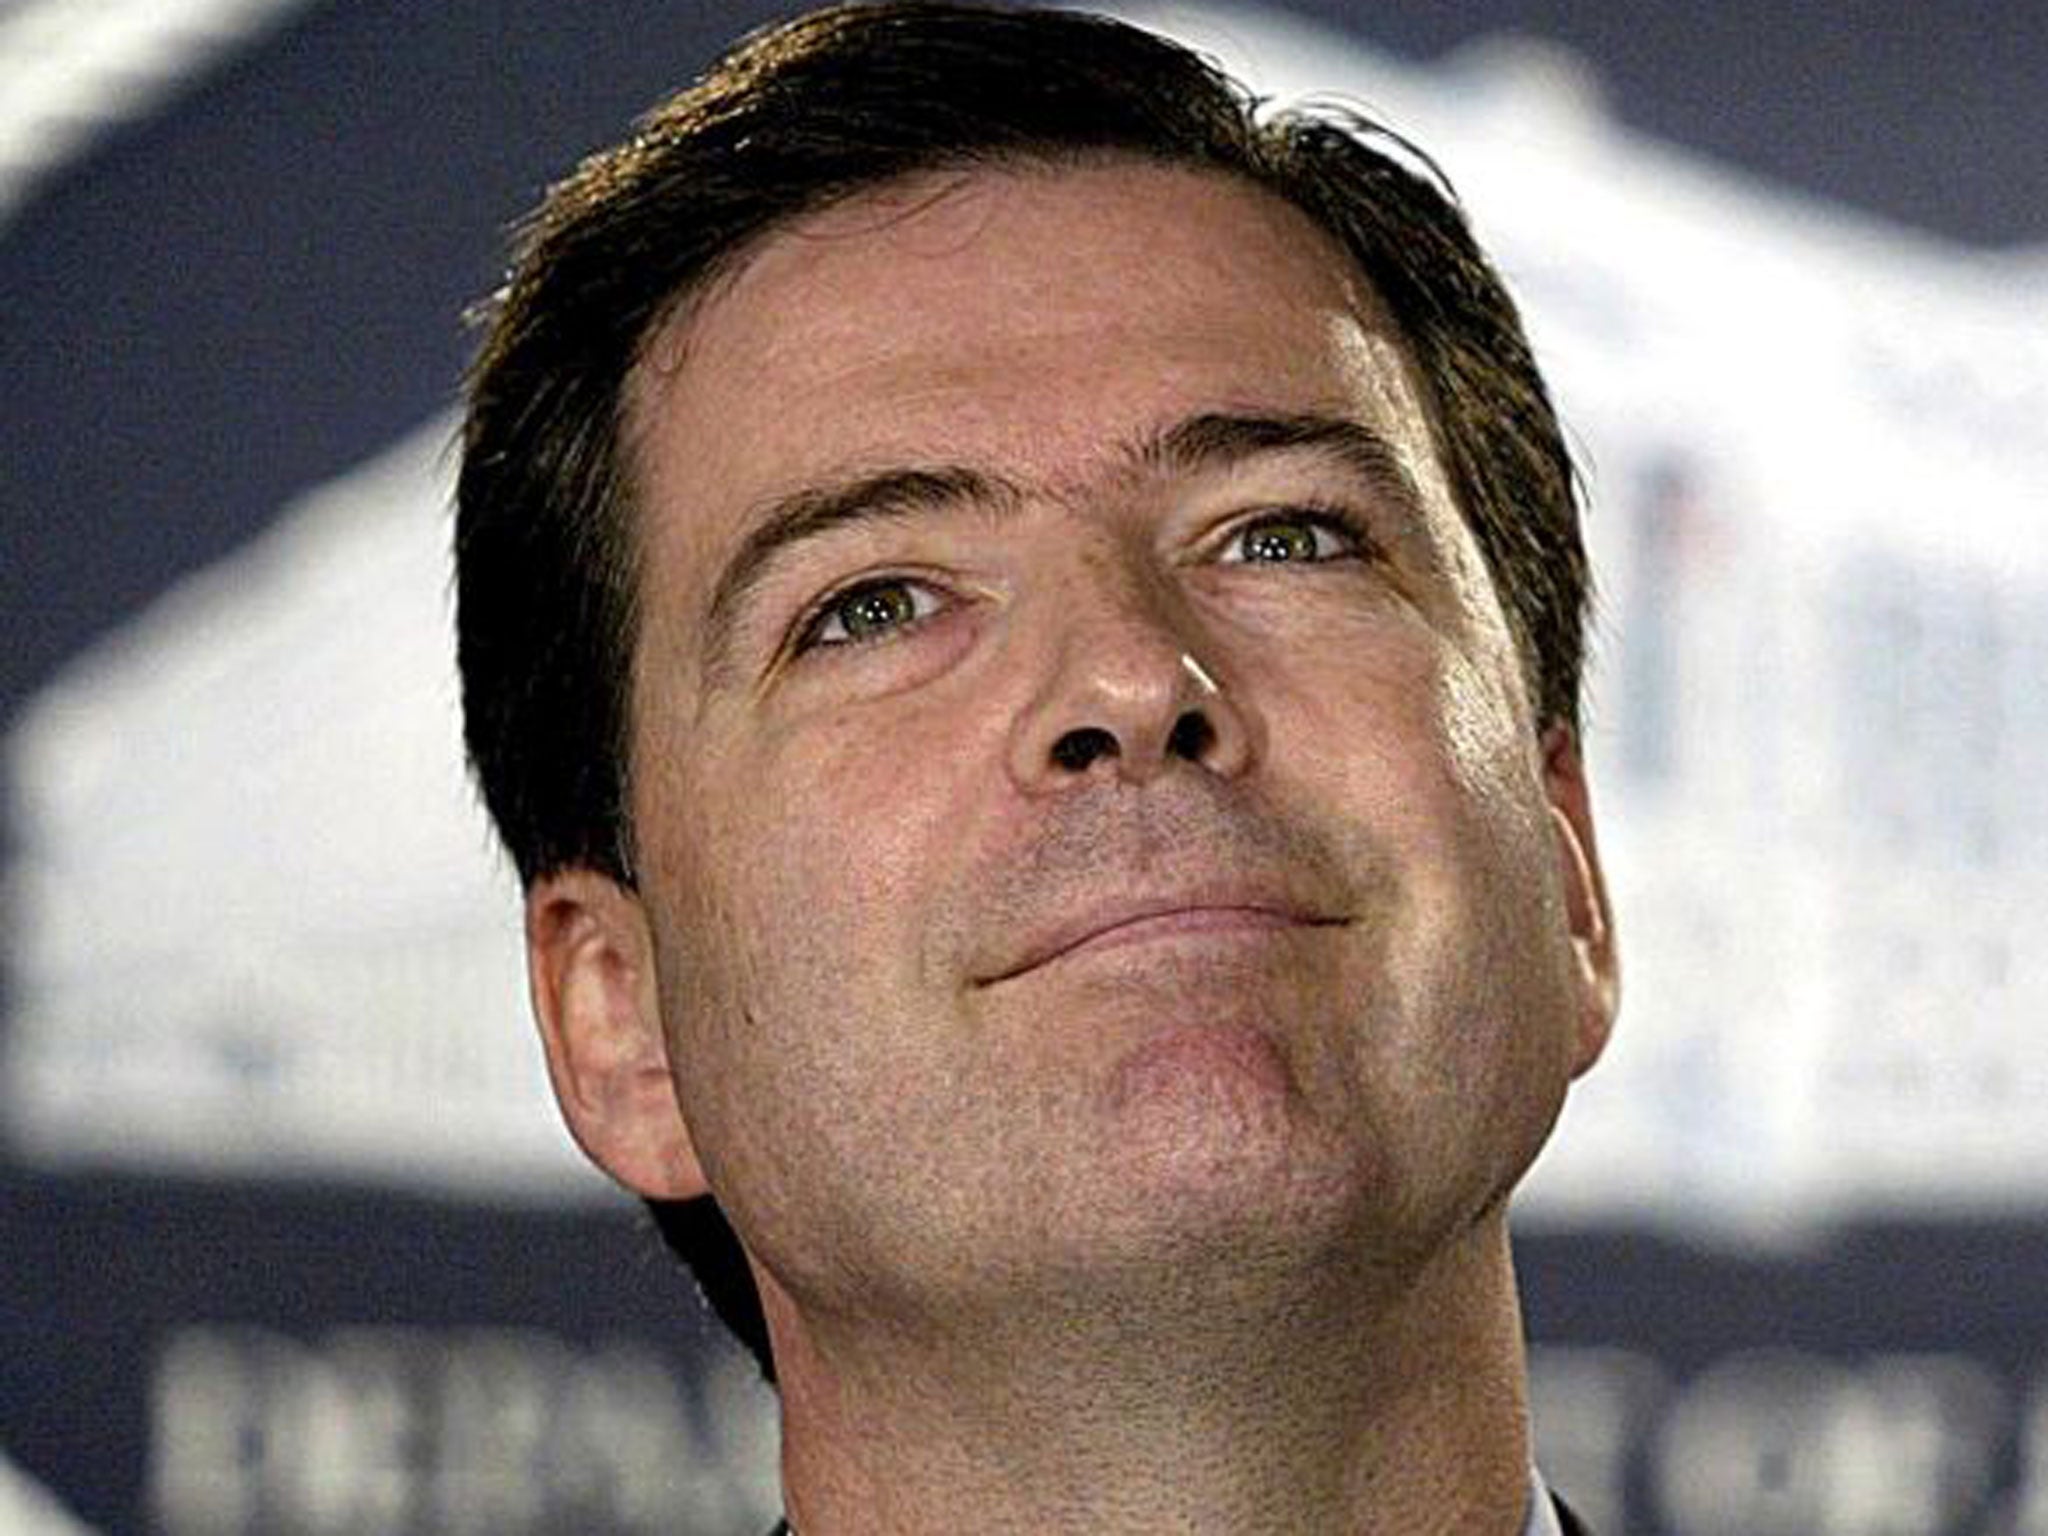 James Comey: The 6ft 8in set to lead the FBI | The Independent | The Independent